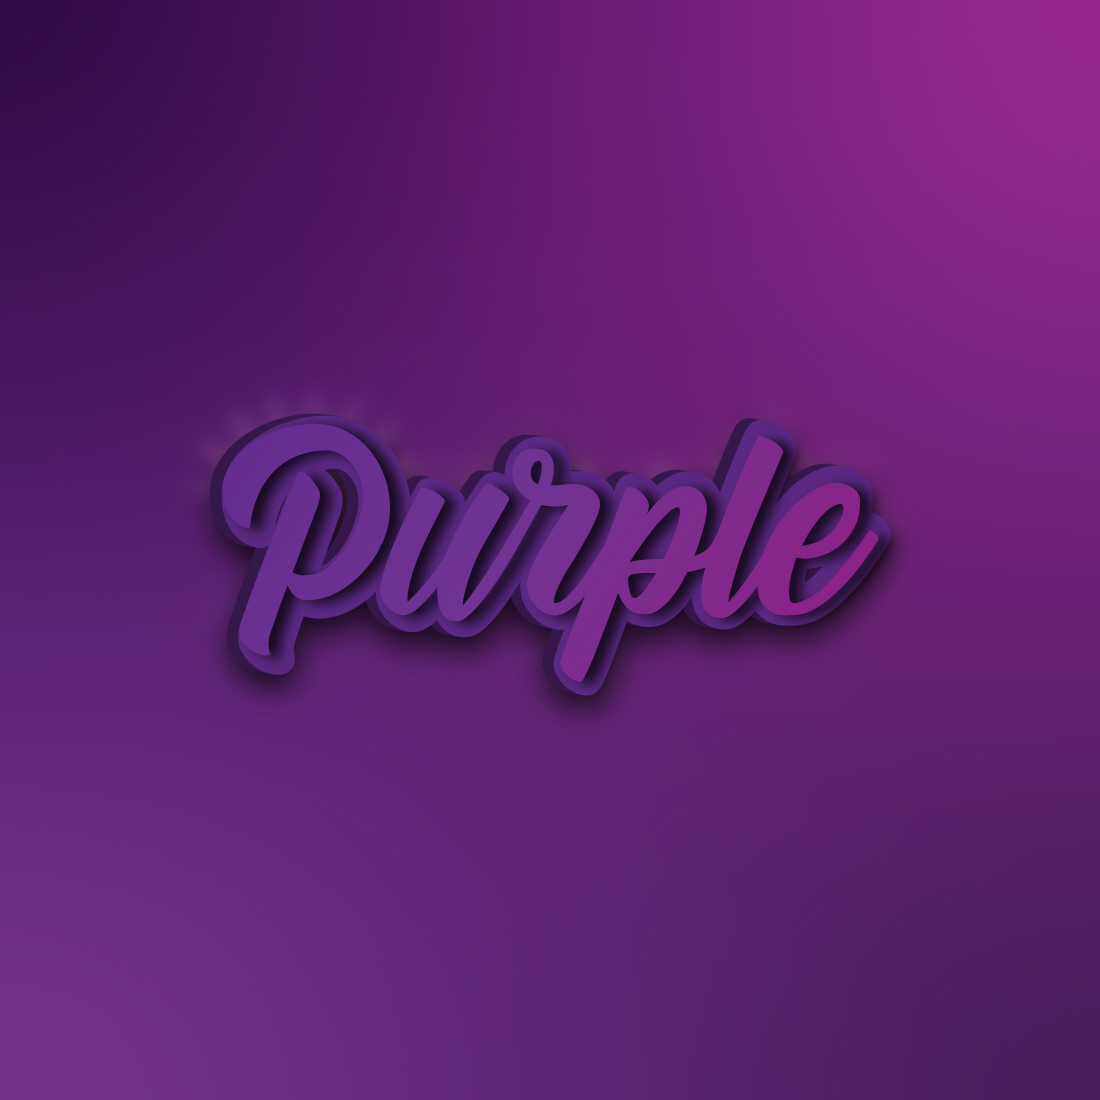 Purple text that says purple on the bottom editable text effect, text, 3d purple eps text effect, style 3d purple text effect,t purple 3d editable text effect, 3d purple psd text, purple 3d text style effect, preview image.